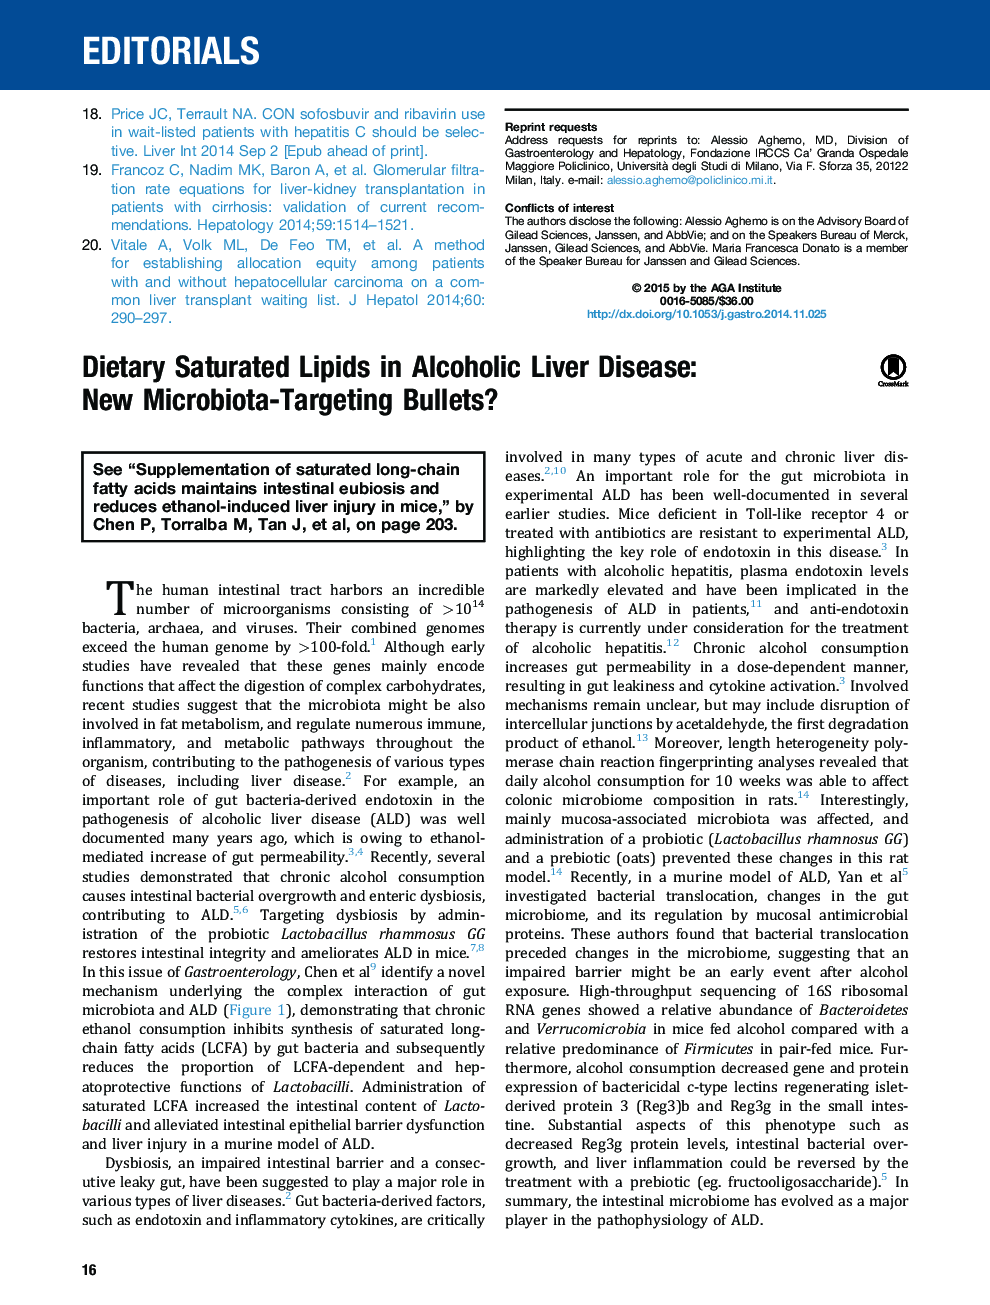 Dietary Saturated Lipids in Alcoholic Liver Disease: NewÂ Microbiota-Targeting Bullets?